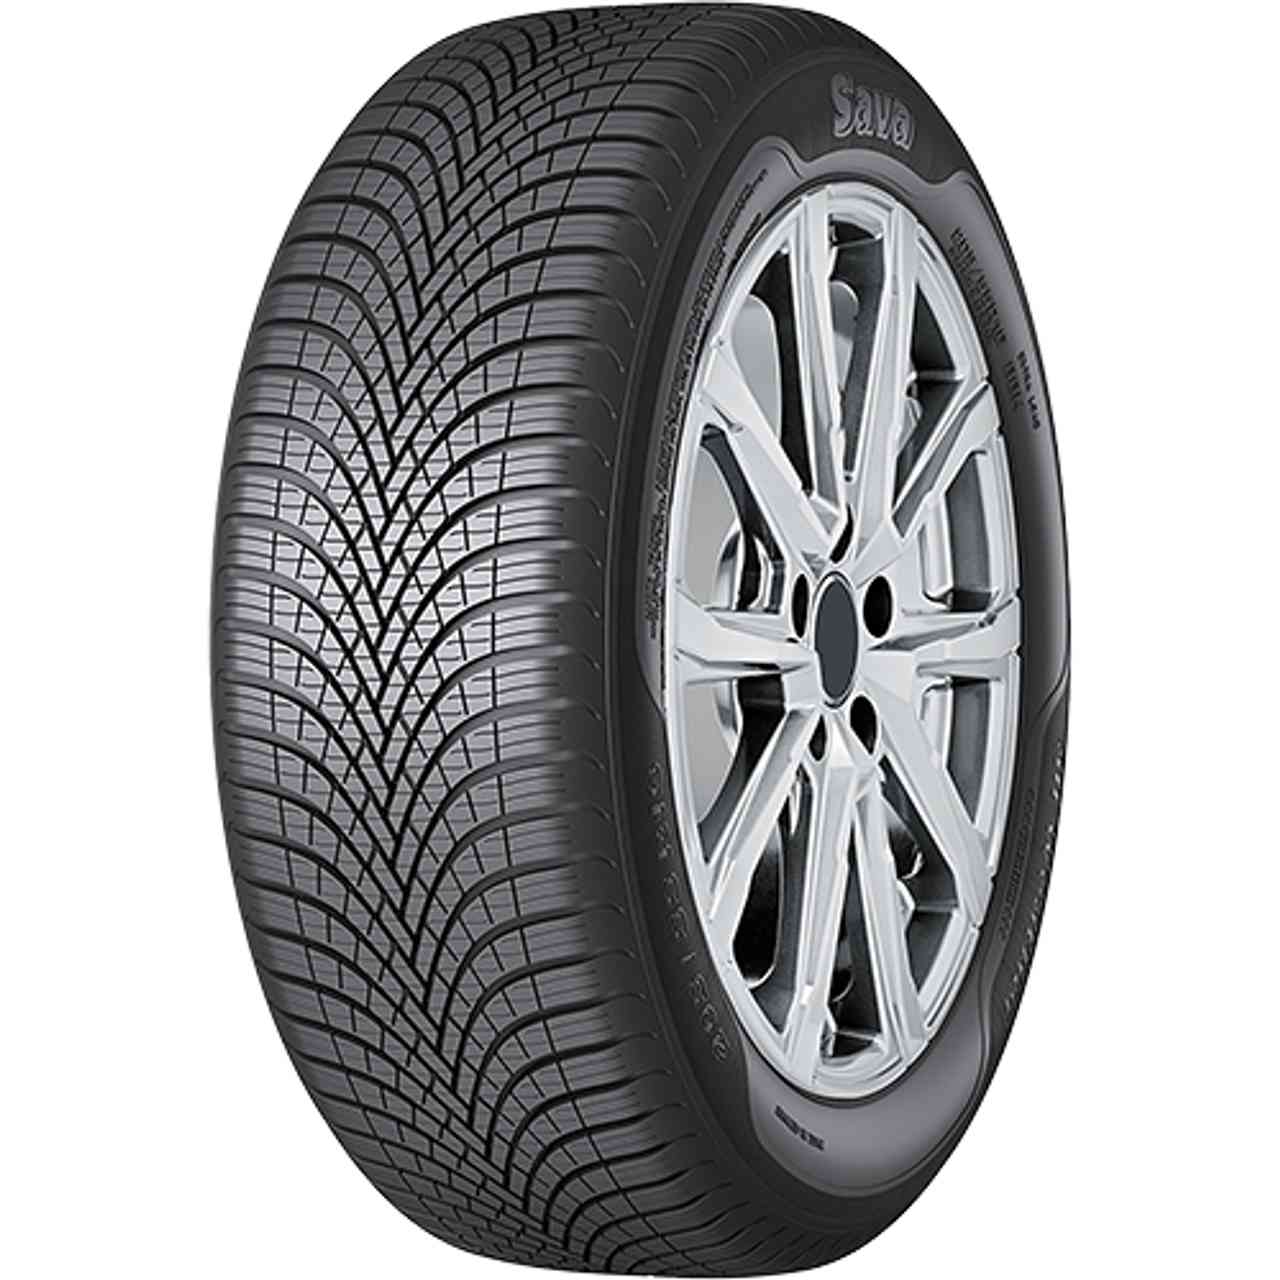 SAVA ALL WEATHER 215/65R16 98H BSW